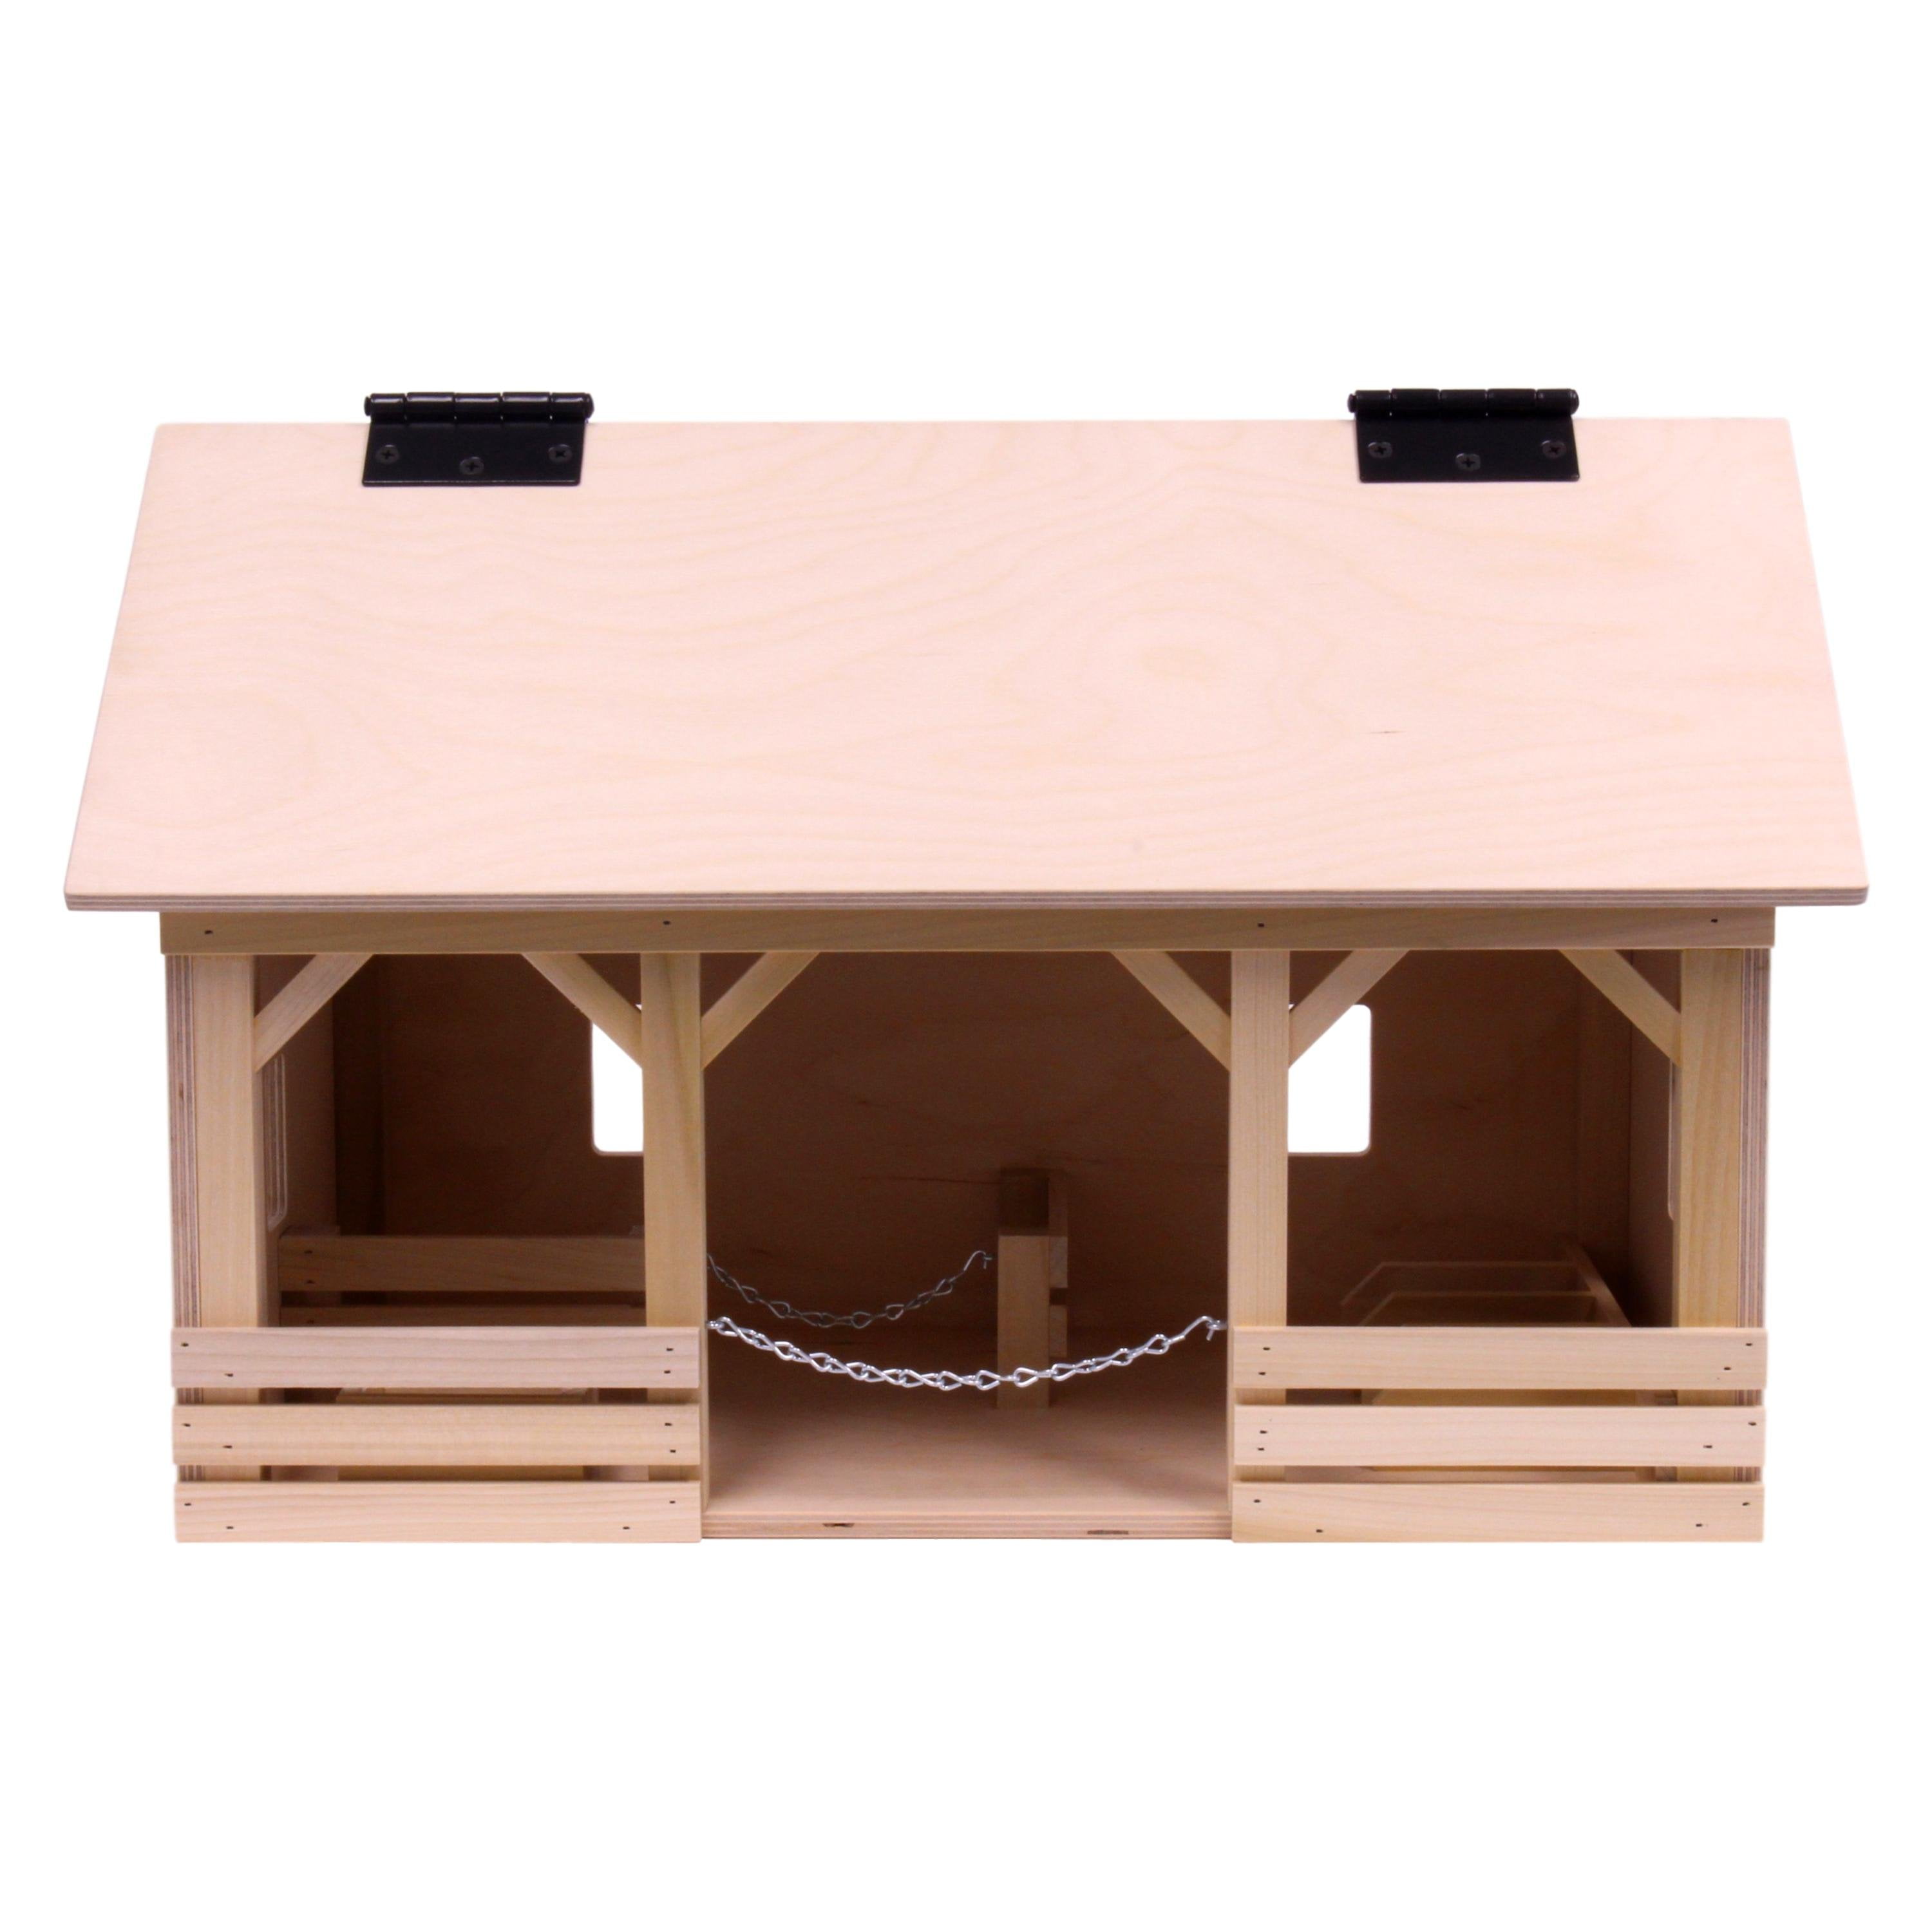 Amish-Made AmishToyBox.com Wooden Ranch Shed Barn Toy with Hay Loft 